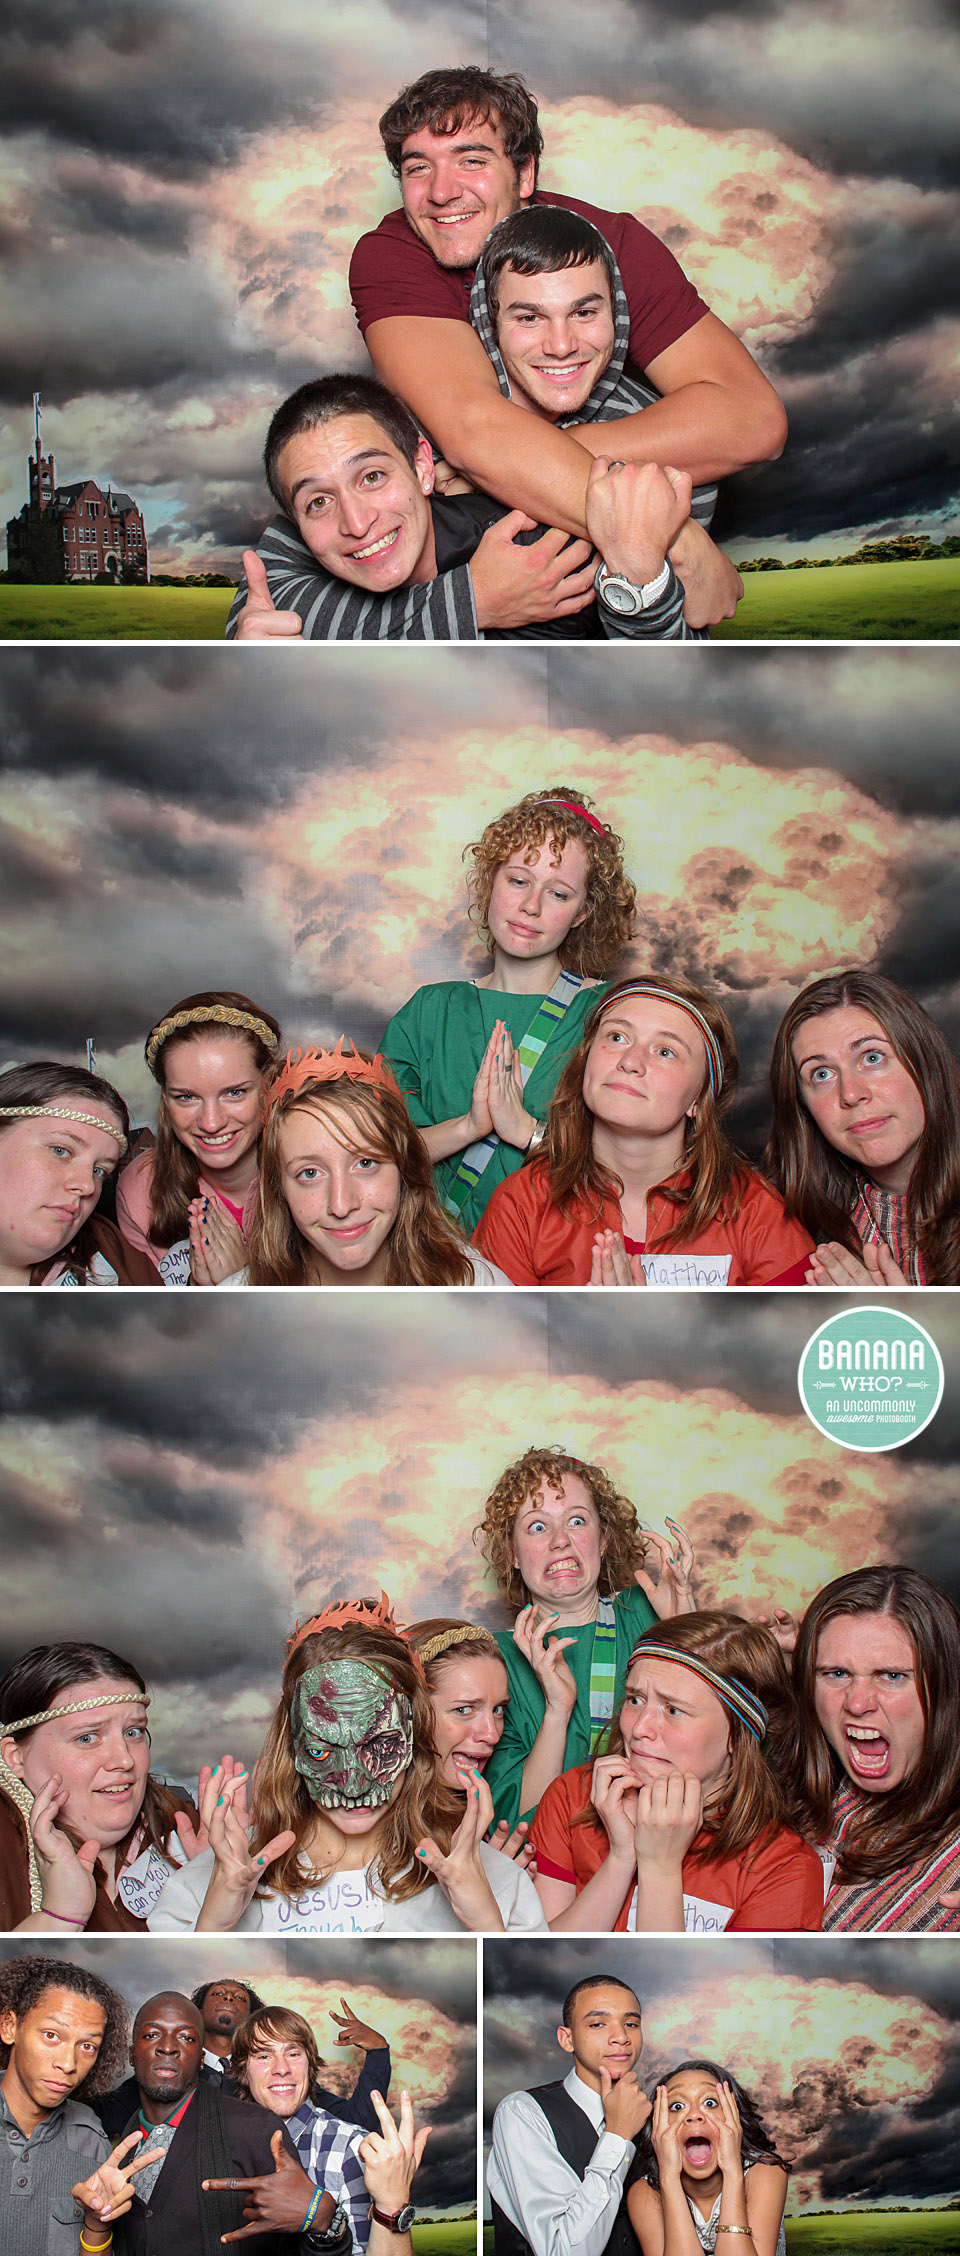 Photobooth ideas, Angels and demons, GU students, dance themes